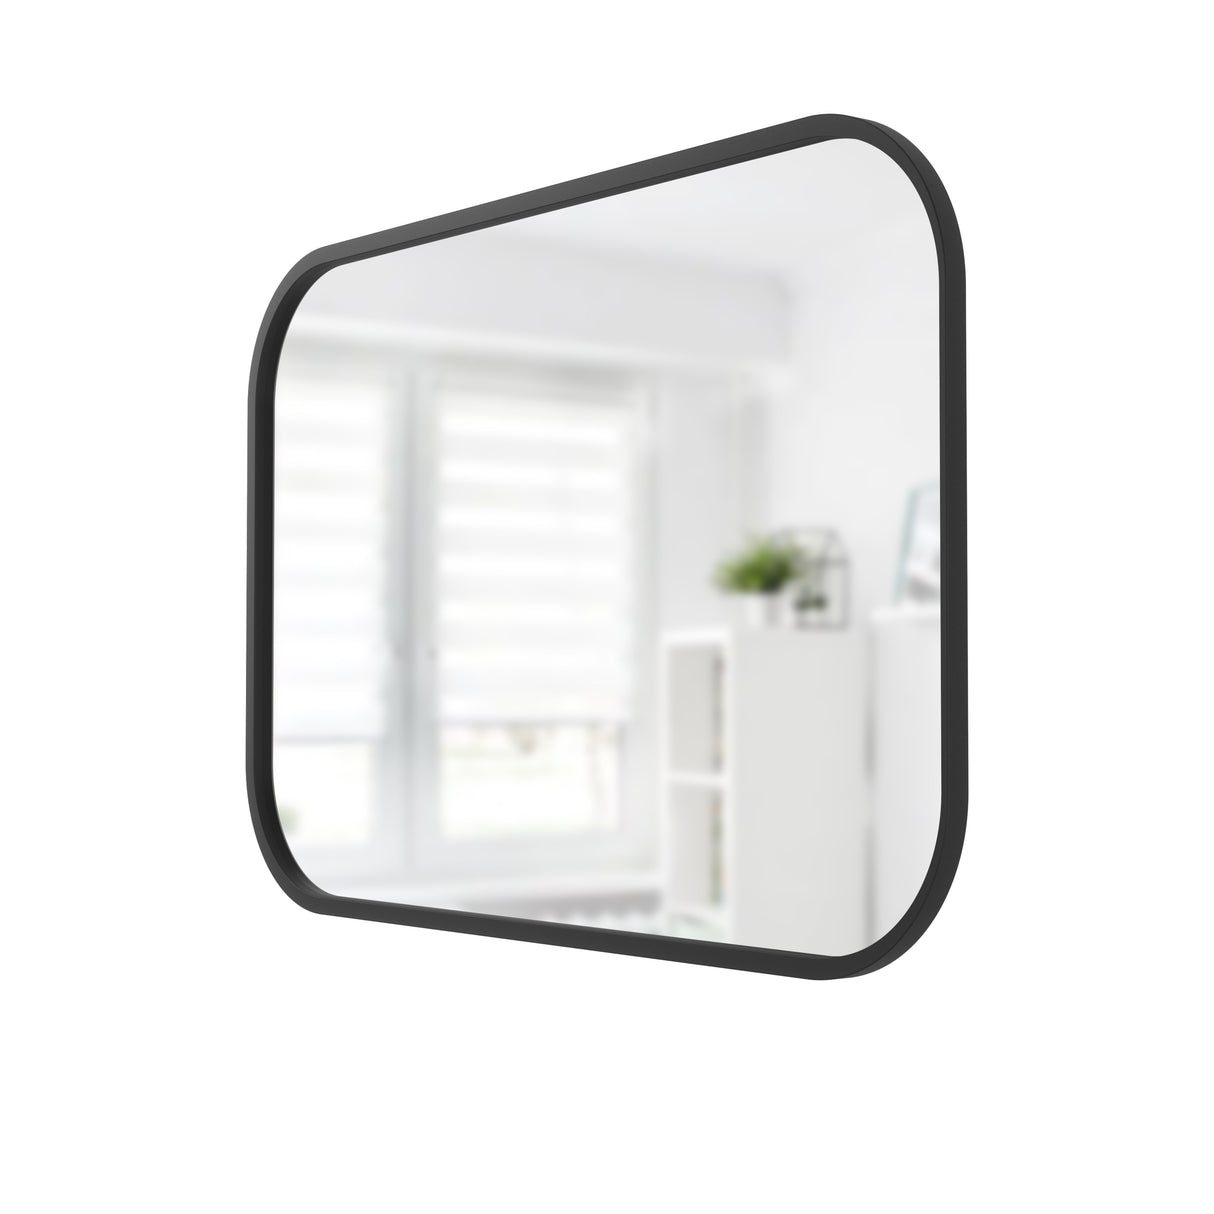 Wall Mirrors | color: Black | size: 24x36" (61x91 cm)